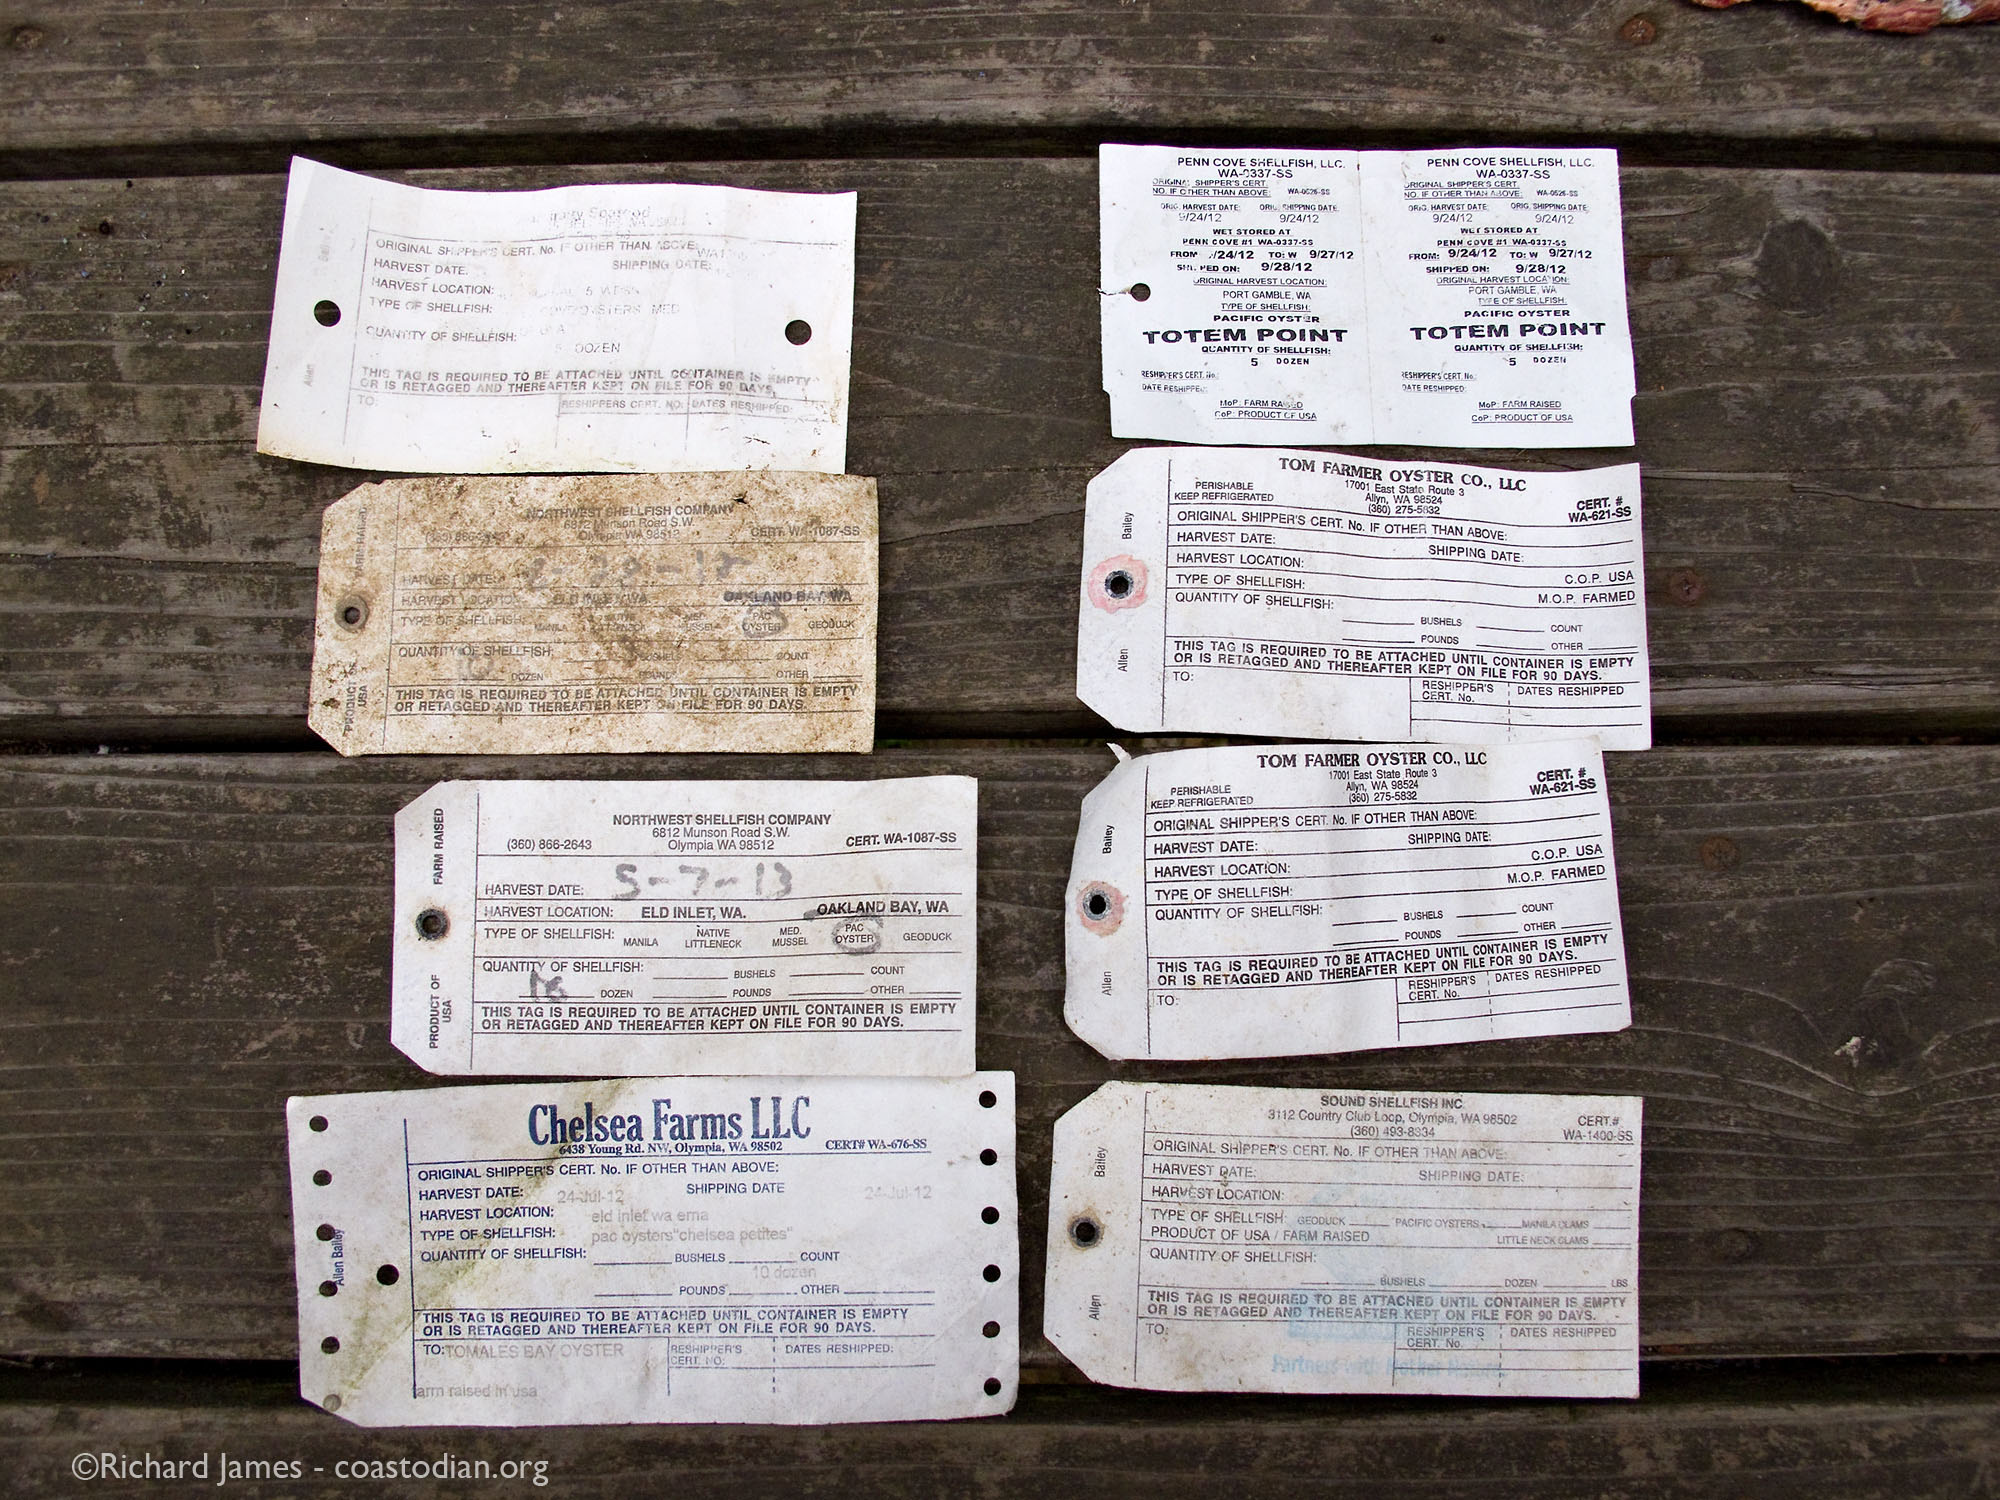 Tags from oyster bags shipped from Washing State to Marin. Do you know your farmer? Call them at the number you see on the tags above.